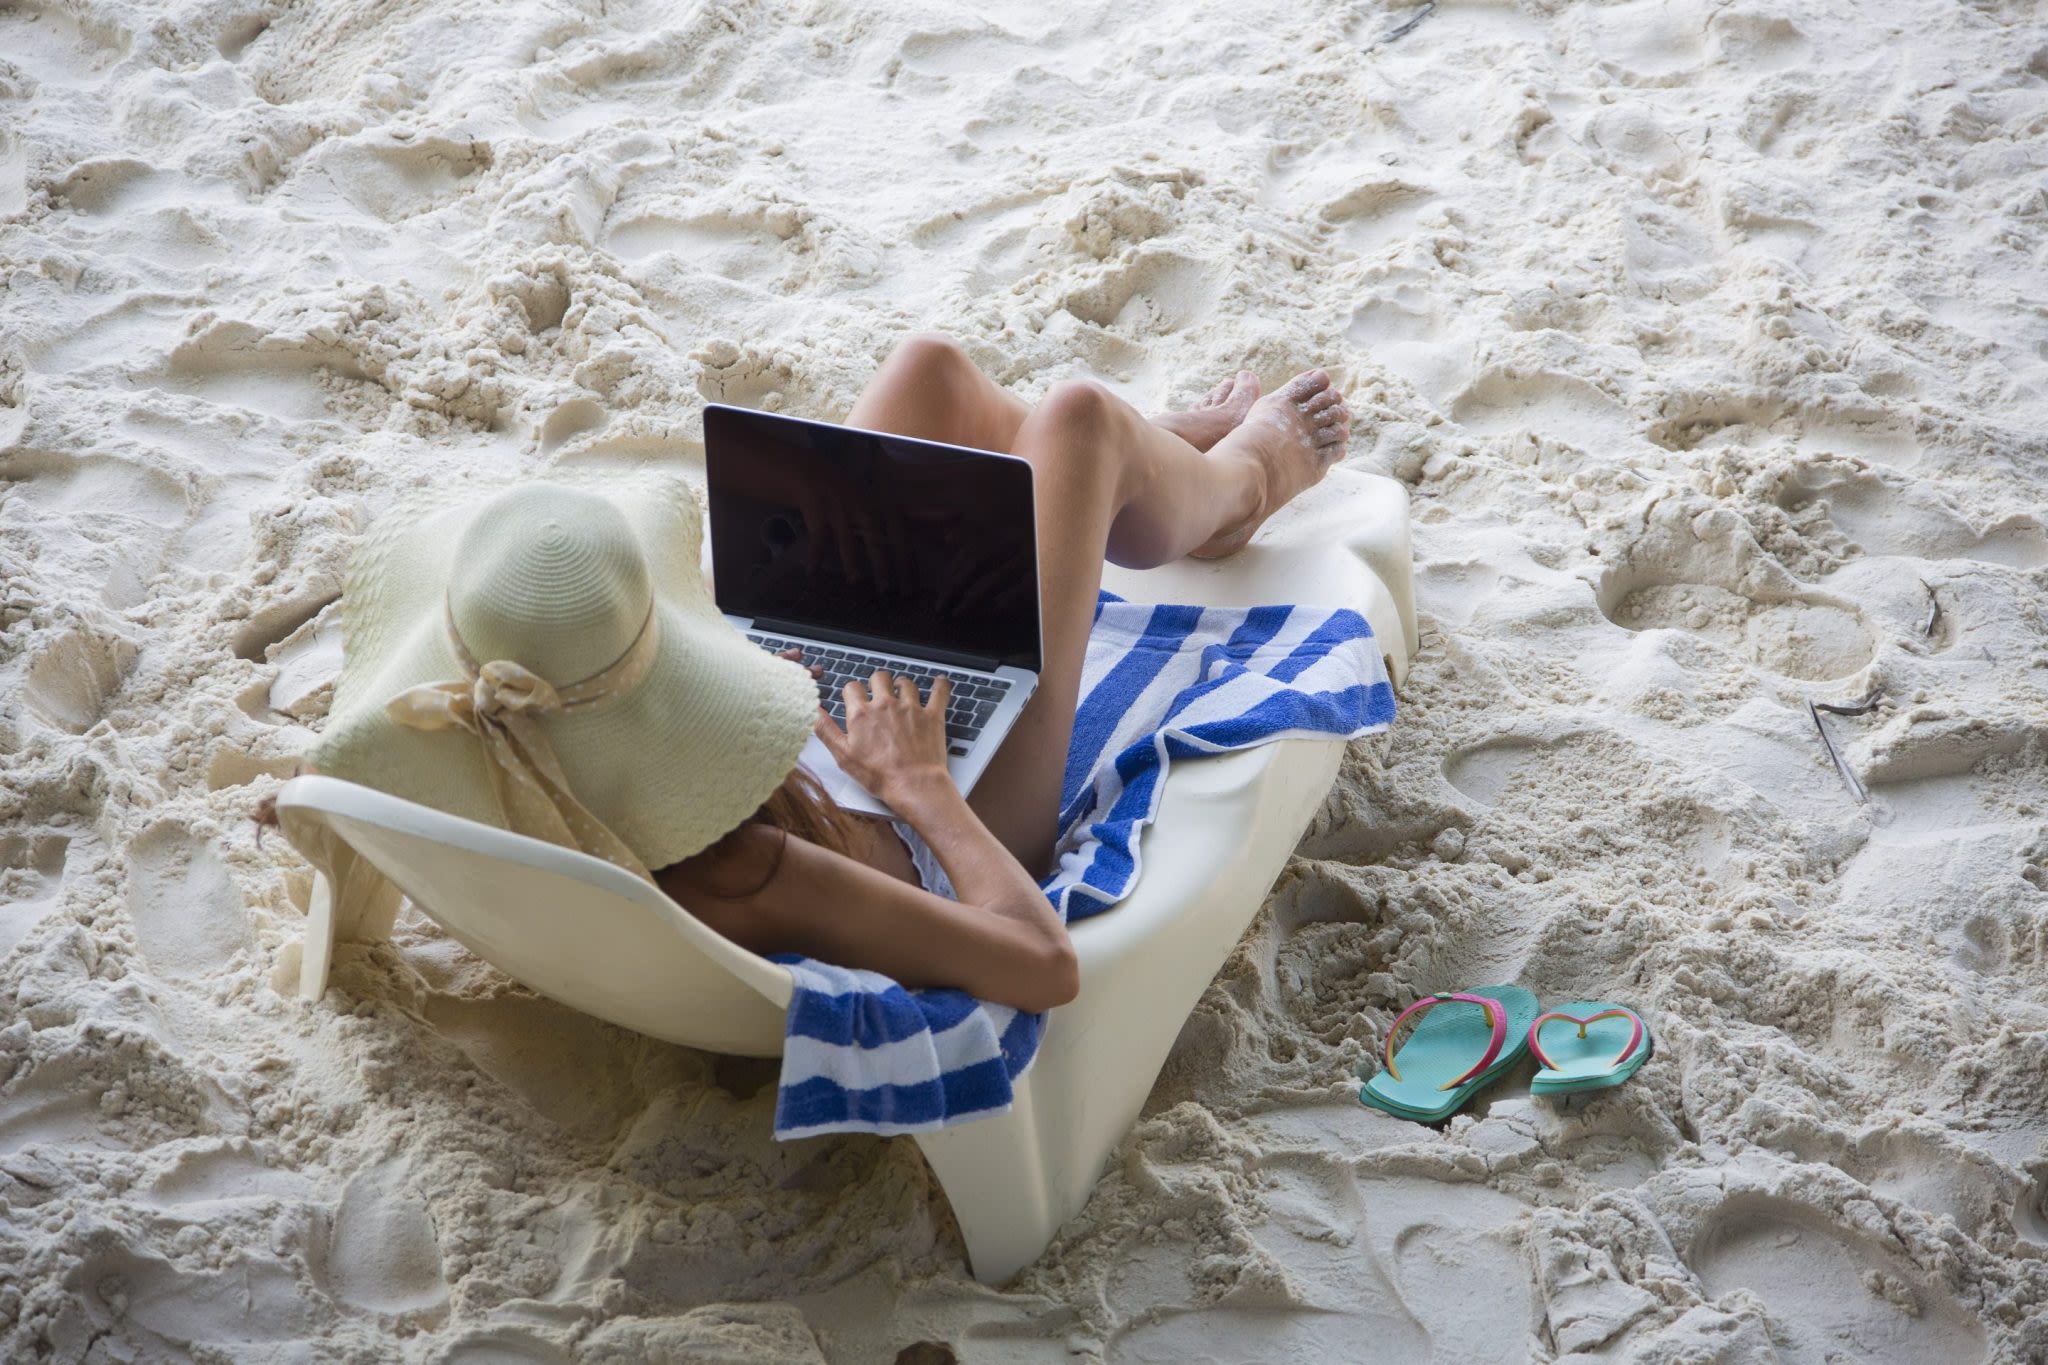 Millennials call it ‘quiet vacationing,’ but it’s really remote work gone wrong—and it’s CEOs’ worst nightmare